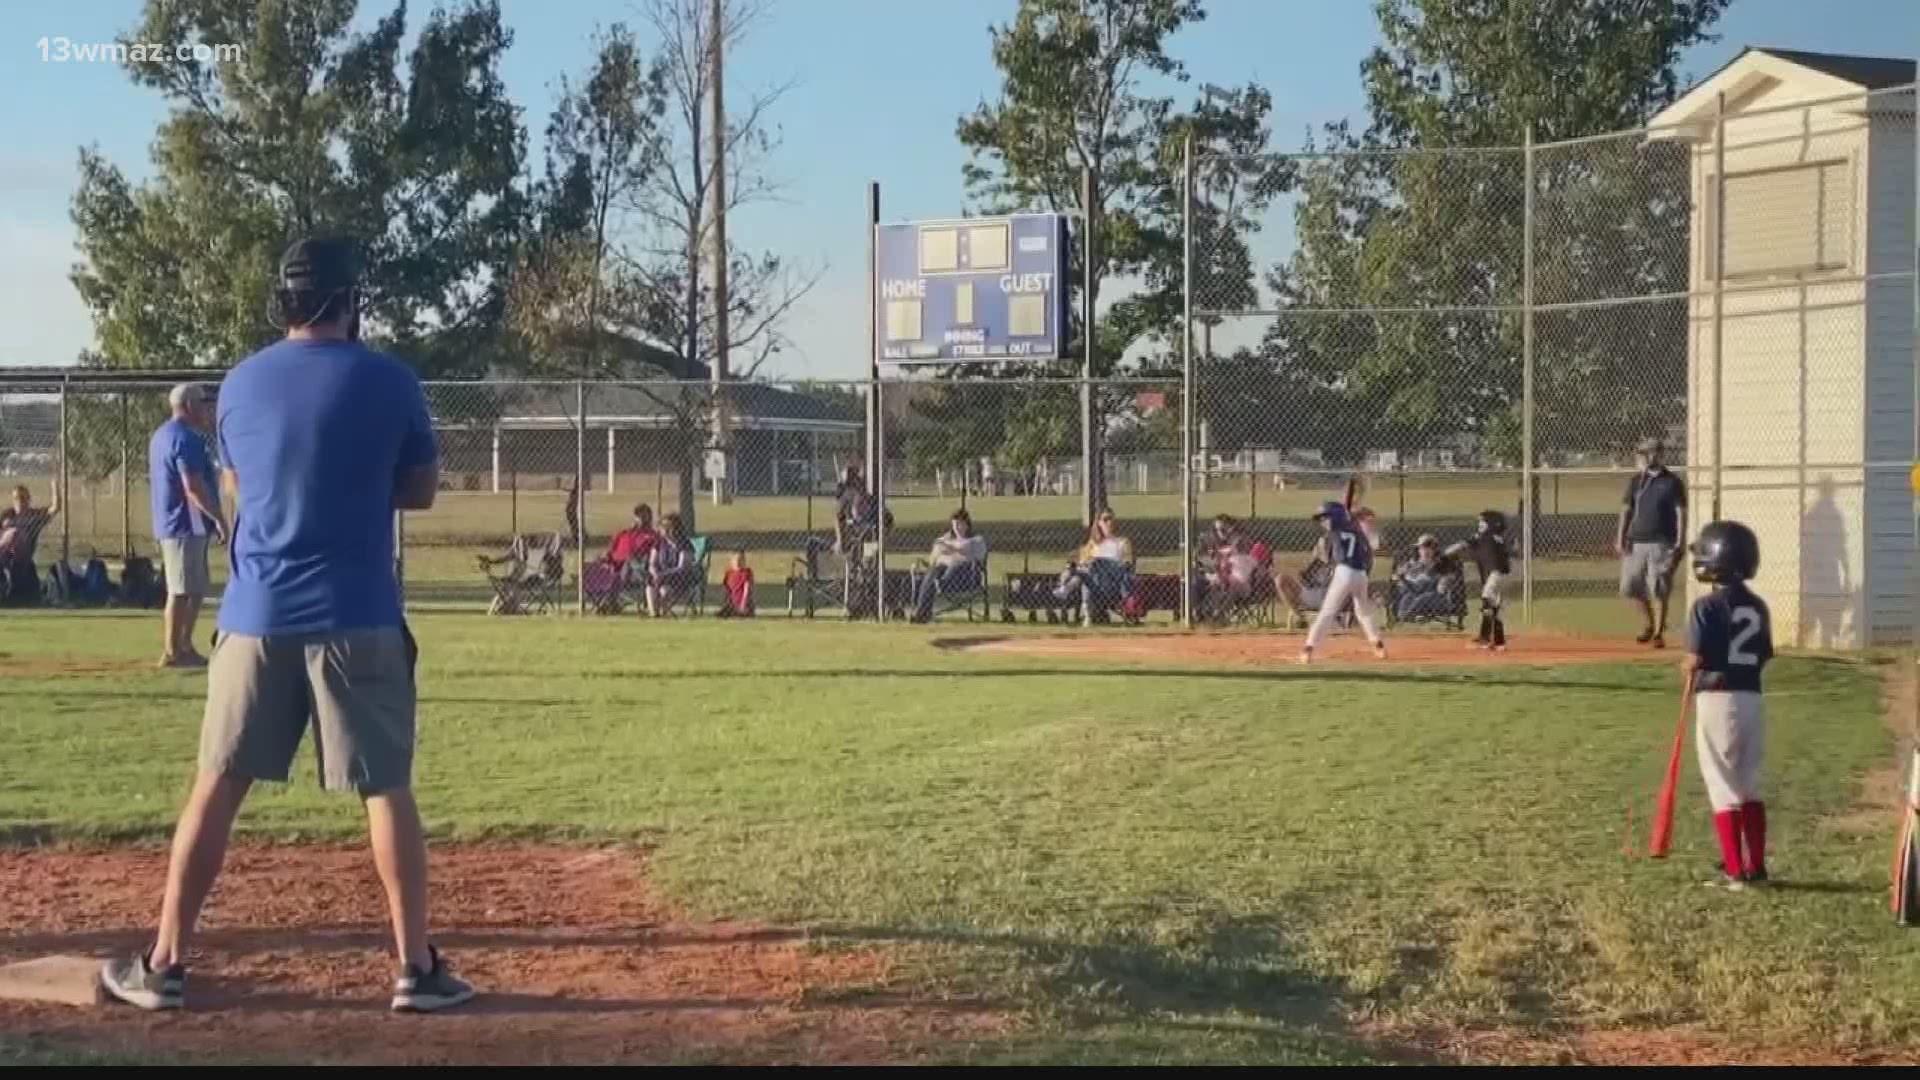 It's almost time to talk baseball in Warner Robins and the city's little league team is getting prepared to start its spring season.